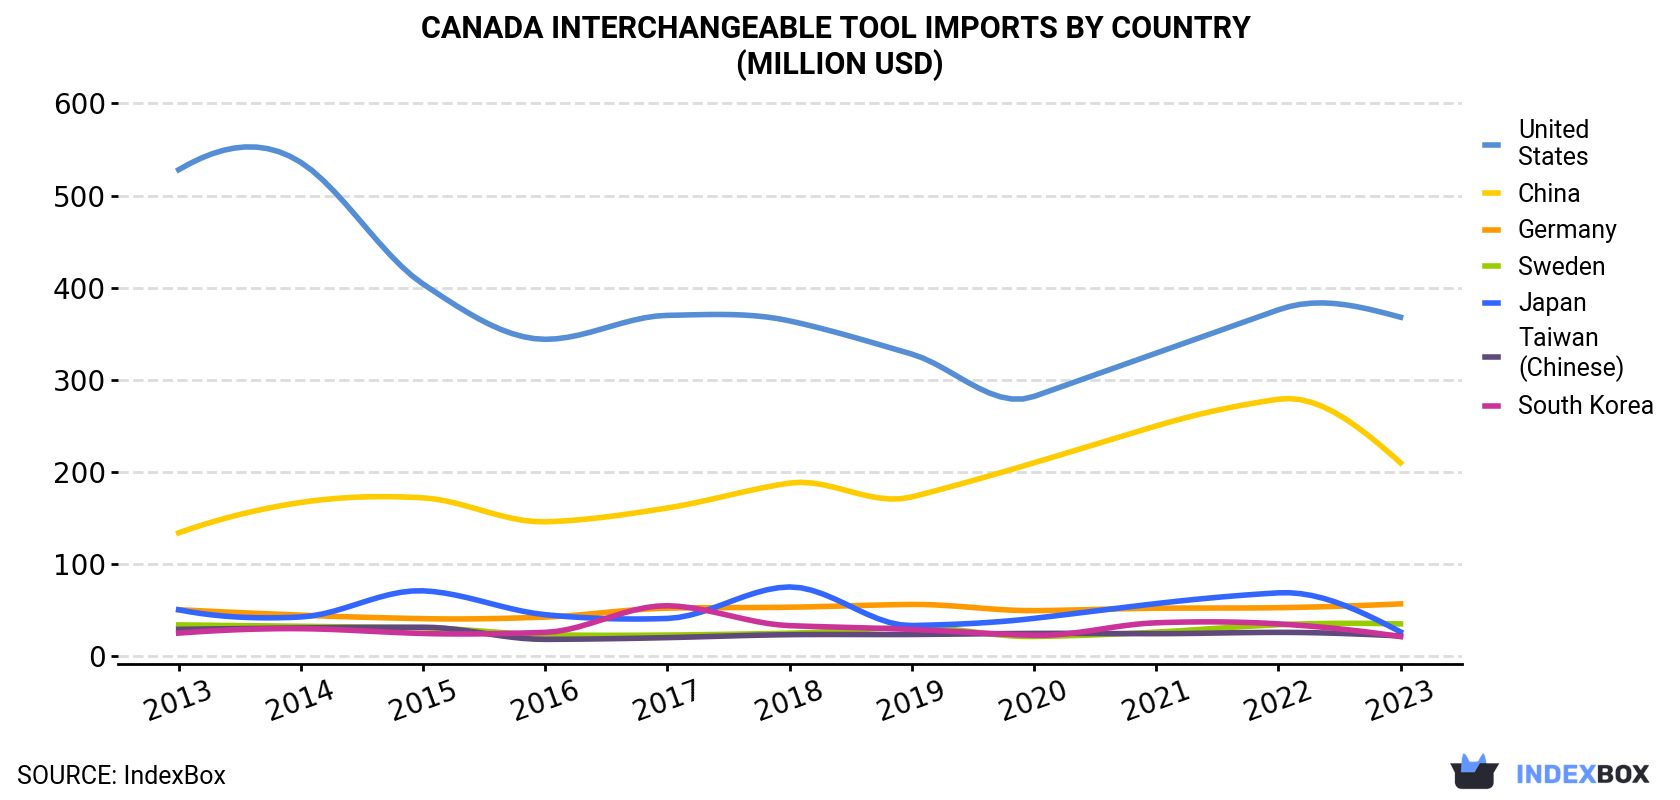 Canada Interchangeable Tool Imports By Country (Million USD)